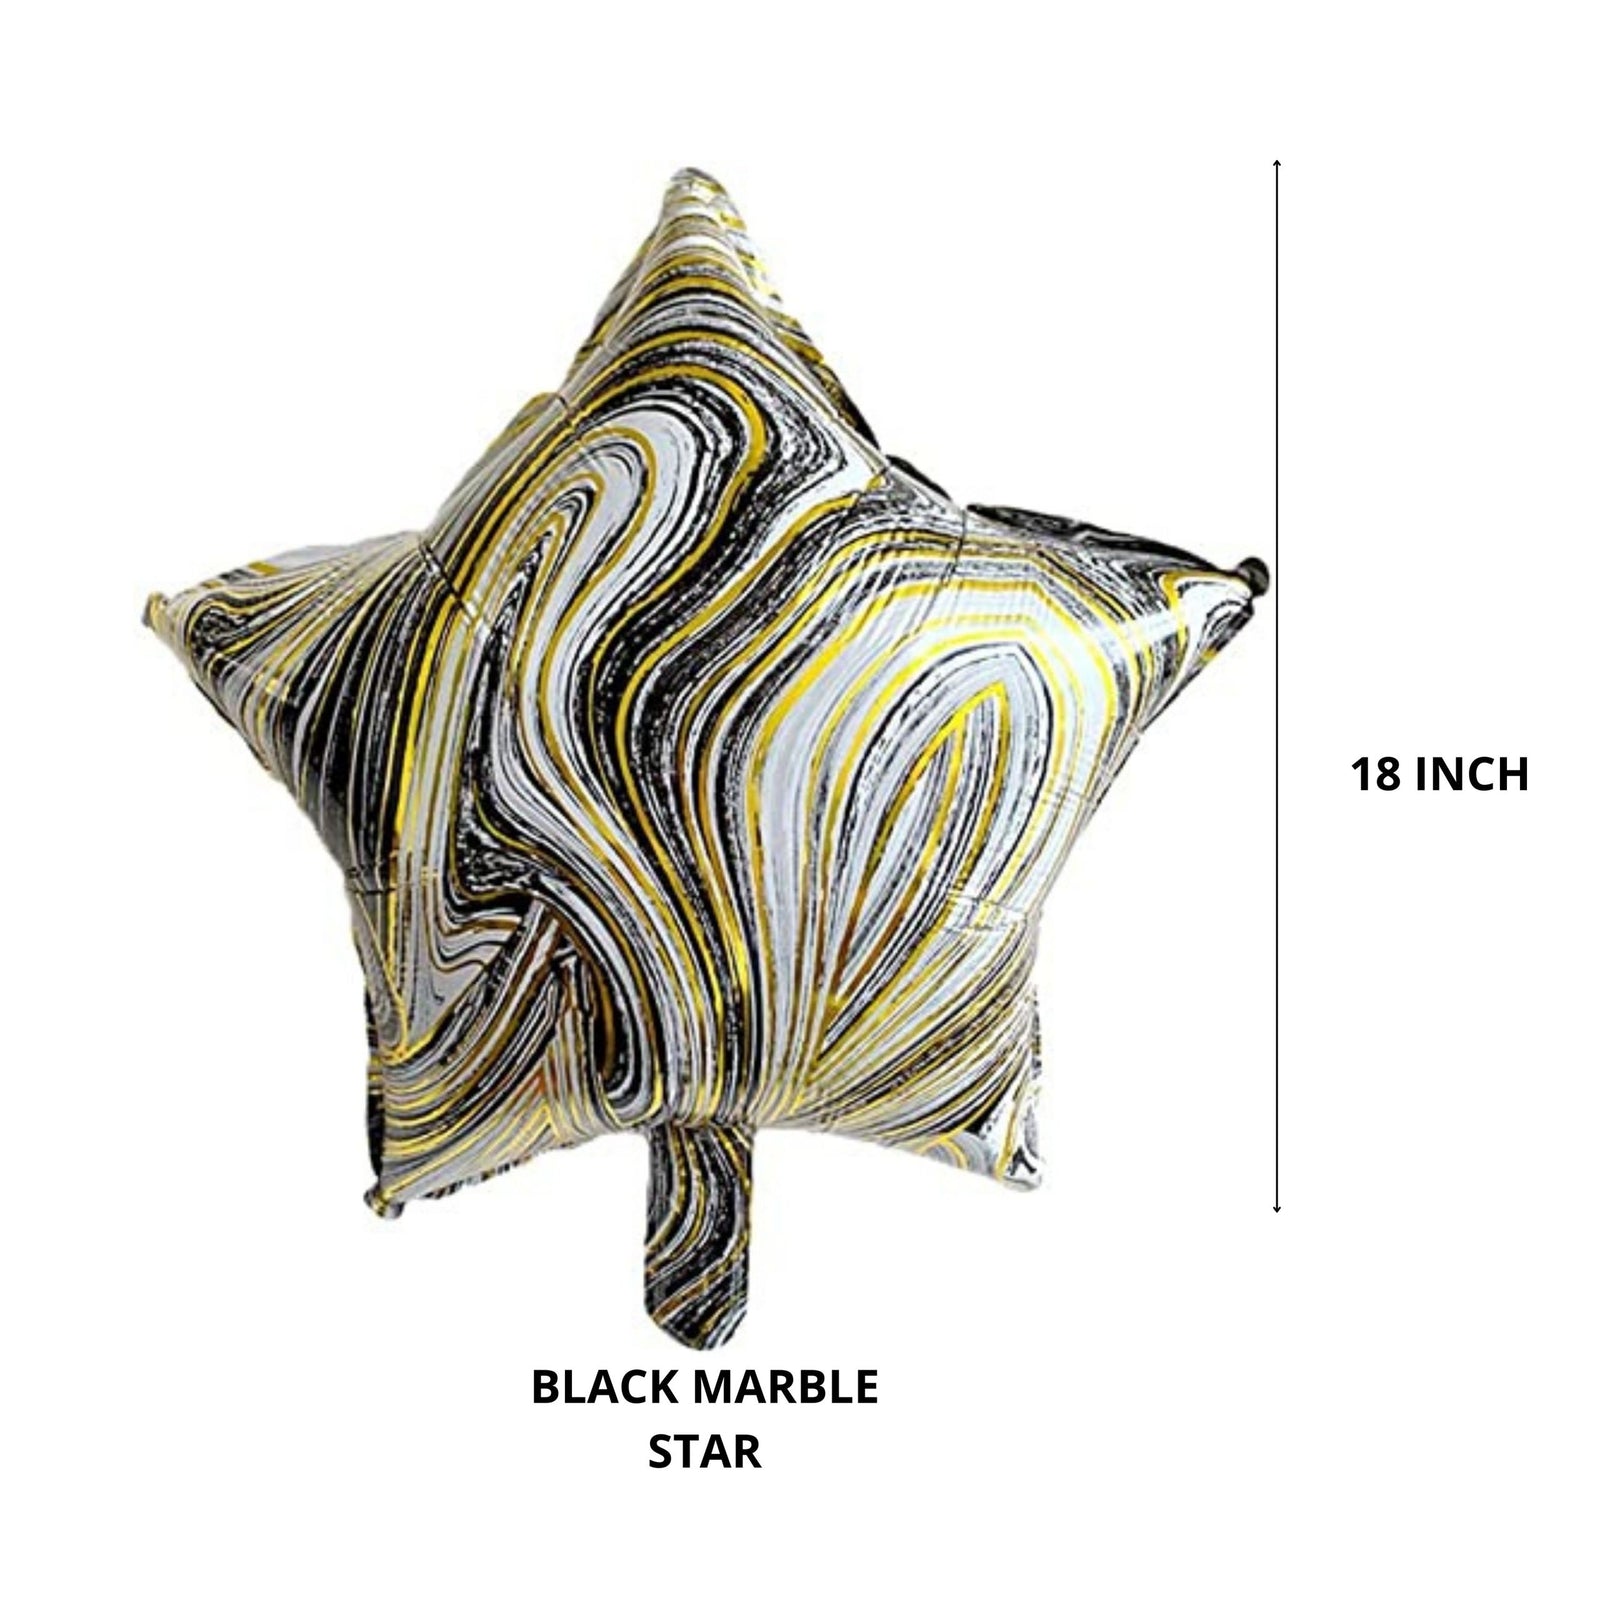 Black Marble Star 18″ inch Foil Balloon for Happy Birthday Party, Anniversary & Valentine Day